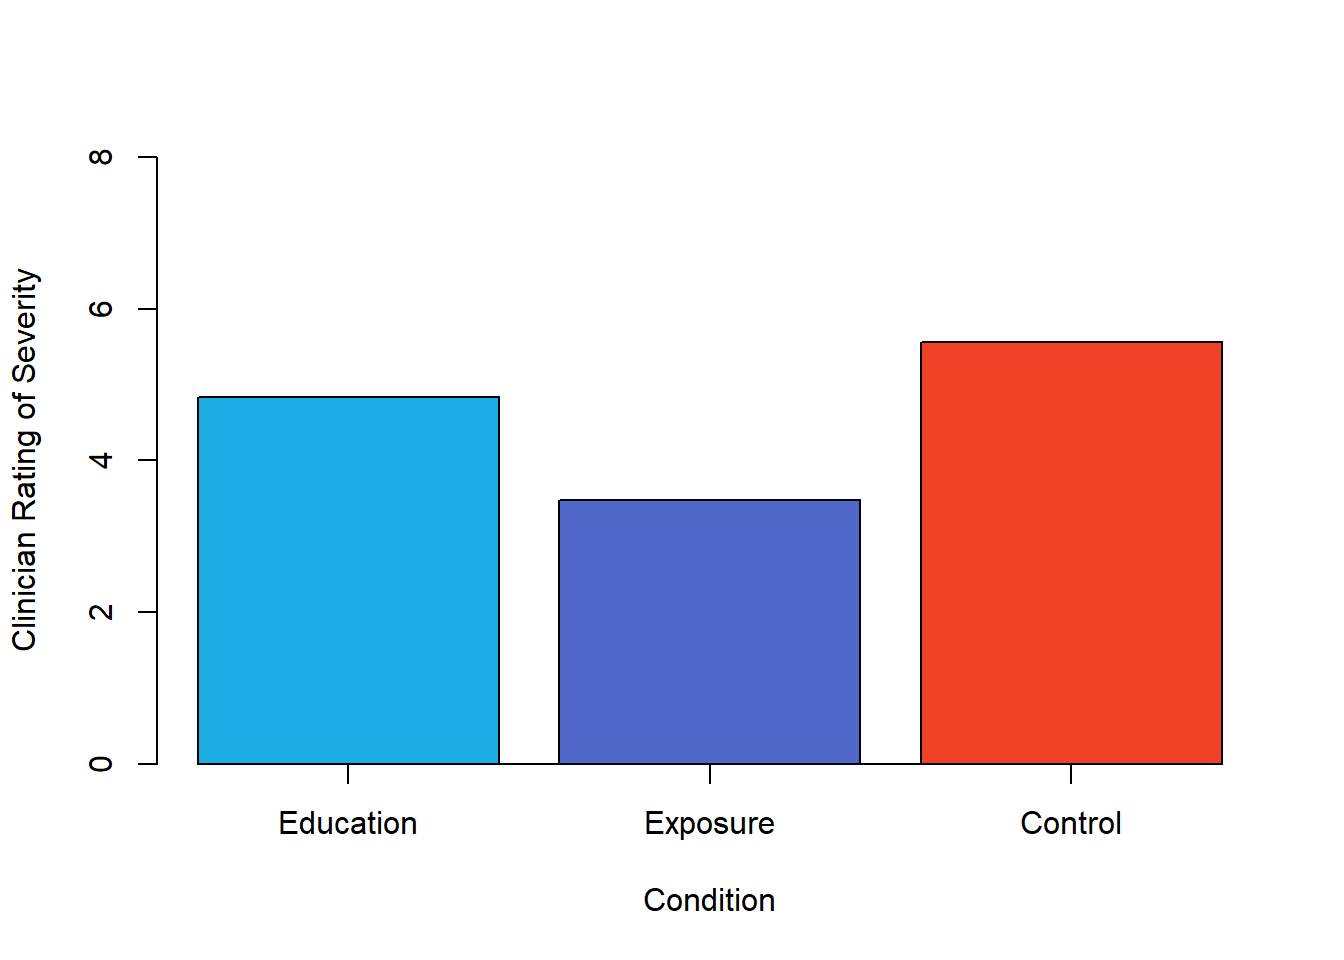 Bar graph showing mean clinician phobia ratings for children in two treatment conditions.